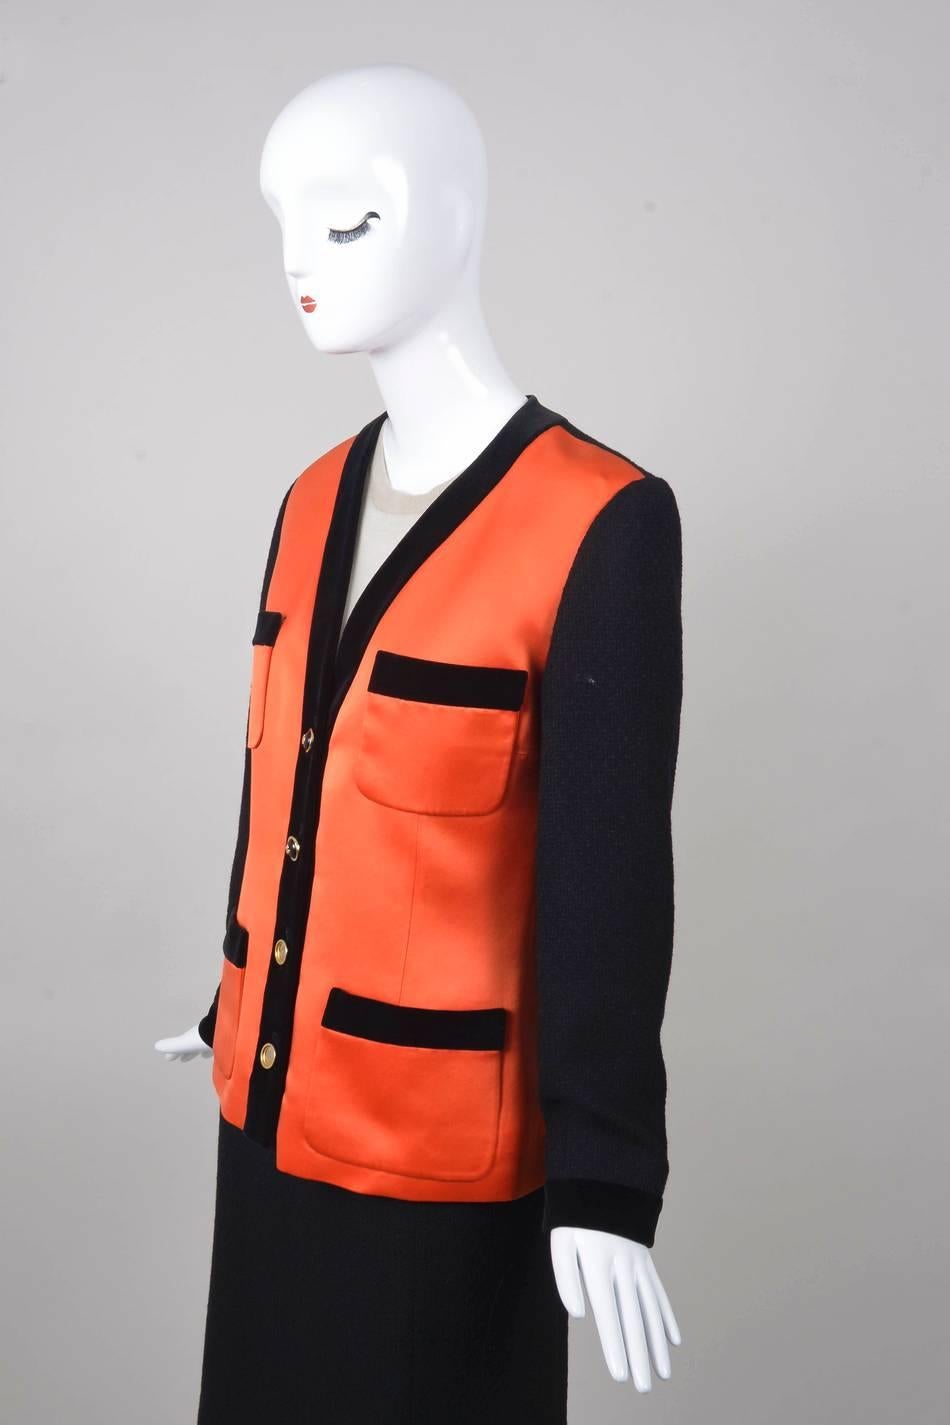 This vinage CHANEL jacket features long knit sleeves with a knit back panel.
Front panels are orange satin with black velvet trim around the neckline and front. Four front pockets with matching velvet trim. Gold and black buttons down front with